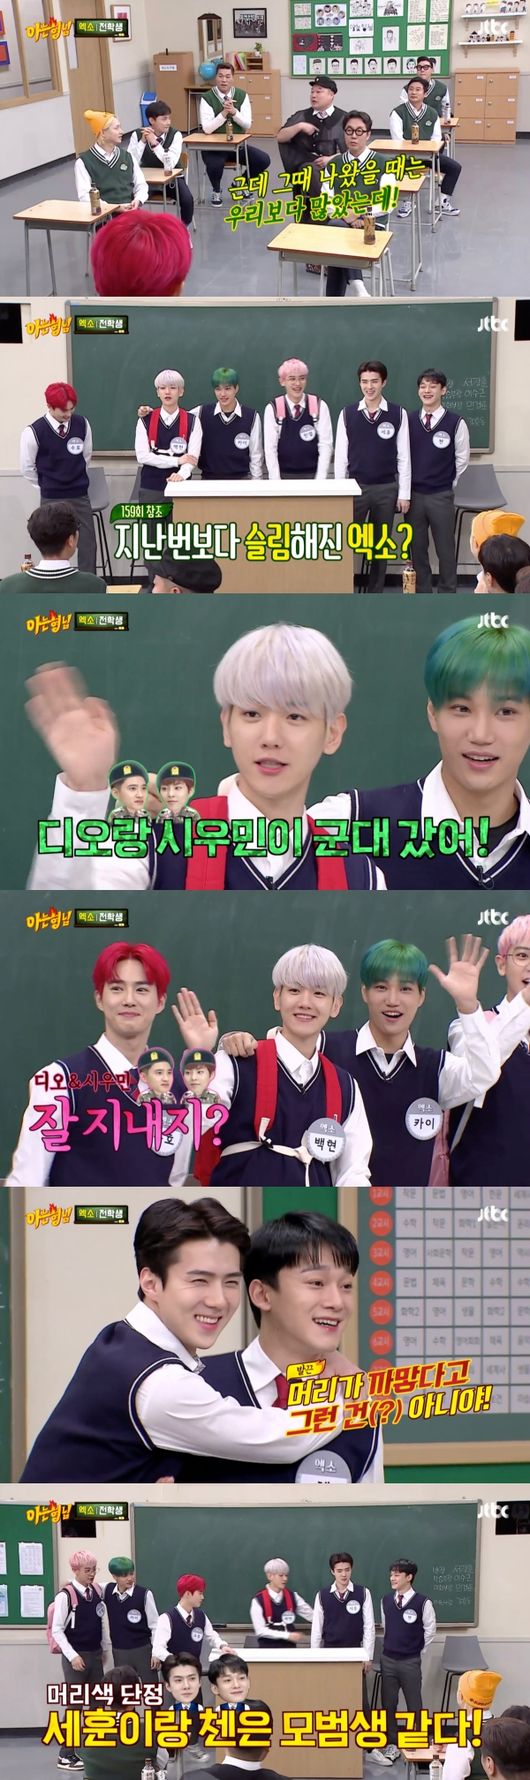 The group EXO appeared on Knowing BrosEXO laughed at the house theater with a great performance that did not feel the gap of three members including XiuminEXO D.O., and Ray, who is active in China.On the JTBC entertainment program Knowing Bros, which was broadcast on the 7th, EXO, who made a comeback with his regular 6th album OBSESSION (Obsession) appeared on the 27th of last month.Knowing Bros Kim No-eun, PD, said in a telephone conversation with , This is my third appearance. EXO plays a big role every time it comes out.I heard that I do not work only a week with this album, but it seems to like our program when I see it on Knowing Bros.I chose it comfortably without hesitation. EXO, who had been looking for Knowing Bros about a year ago, returned to six members except members Xiumin and EXO D.O.EXO did its best to add these shares to the military flag of the two. Kim No-eun PD said, I always made it pleasant and went.The members were less than before, but I was grateful for all the hard work without any gaps. I talked about the members of the army.It seems that the part that is like a friend is fun because it is a concept that my classmates talk about.In addition, EXOs concept of this album itself has a rough self called X-EXO, which seems to be better liked by fans because it melts well in broadcasting.Its a rough look of Chen, which was good, too unexpected, he said.In particular, Kai has collected topics from the trailer that was released before the broadcast, as Kai has given a previous class alumni answer during the Crying in Goyo game.Among them, the words two letters in the padding are two letters in the panties and the embarrassed appearance made a big smile.Kang Ho-dong suggested that I do not intend to perform in full swing in the excellent sense of entertainment of Inil Kai.Kim No-eun PD said, Mr. Kais performance in The Ring in Goyo was great.It seems that Mr. Kais wrong side is different from the image on the stage, so it seems to have become a laughing point for viewers.Knowing Bros screen capture